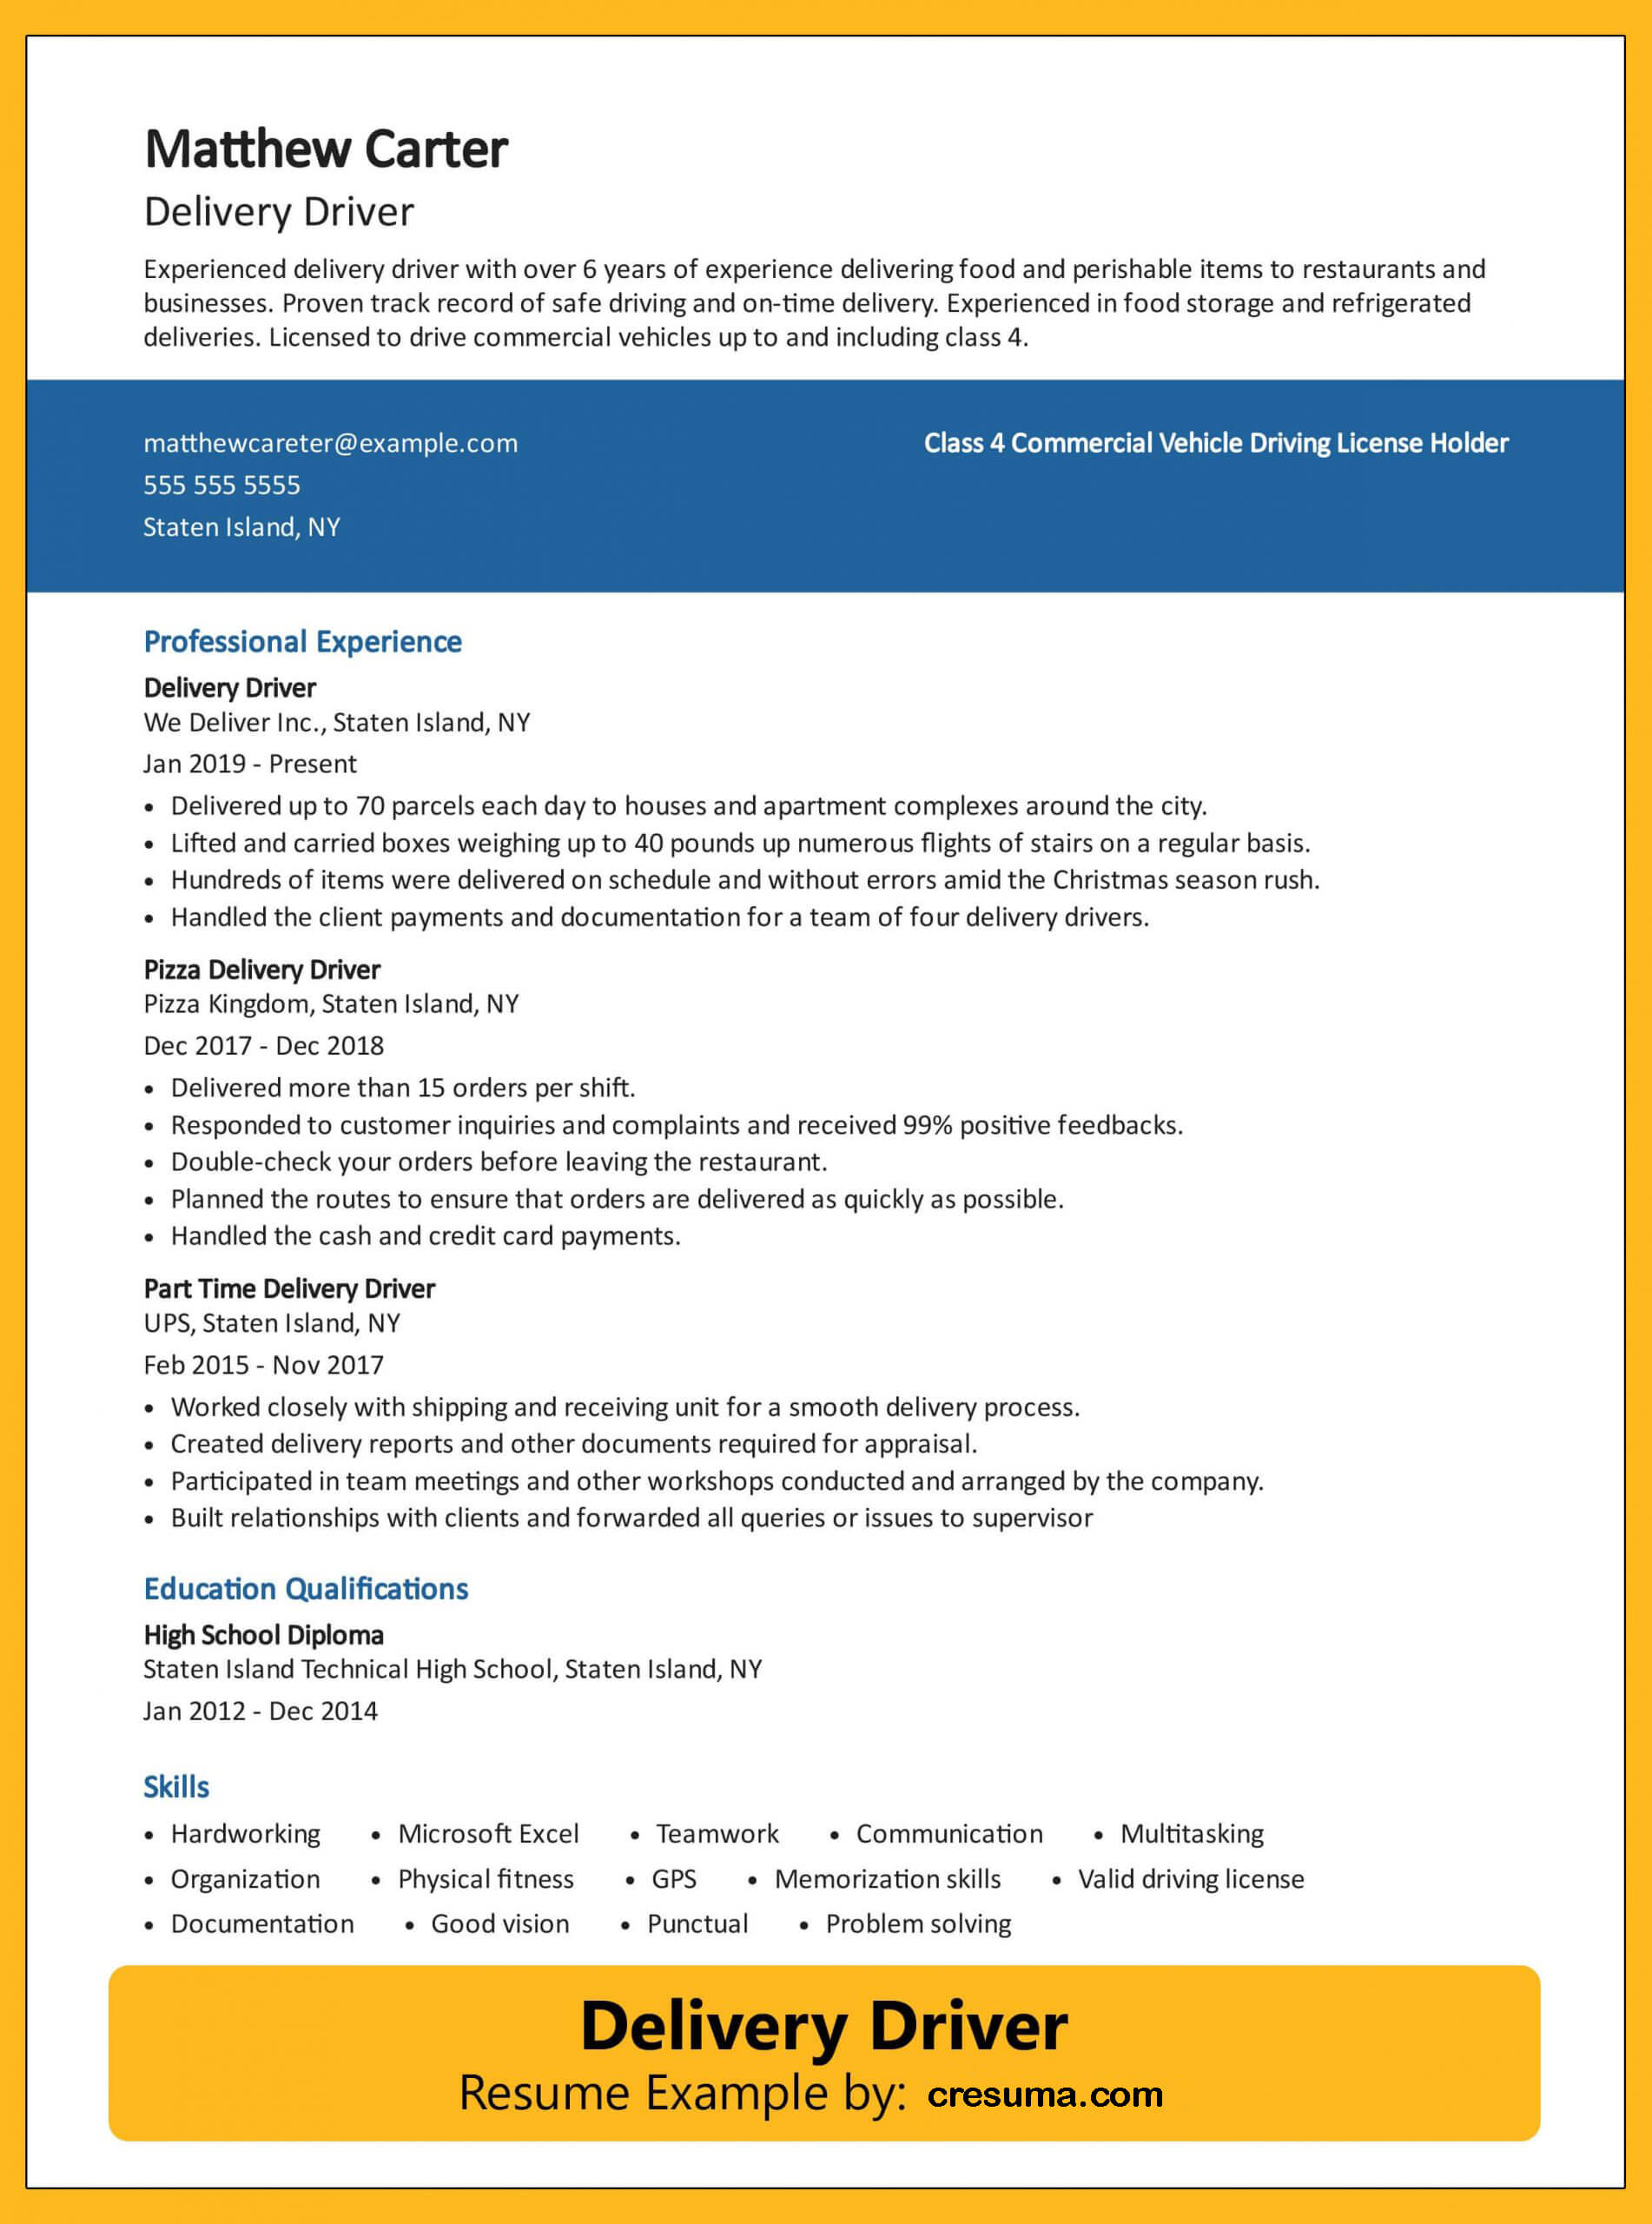 Delivery Driver Resume Example image